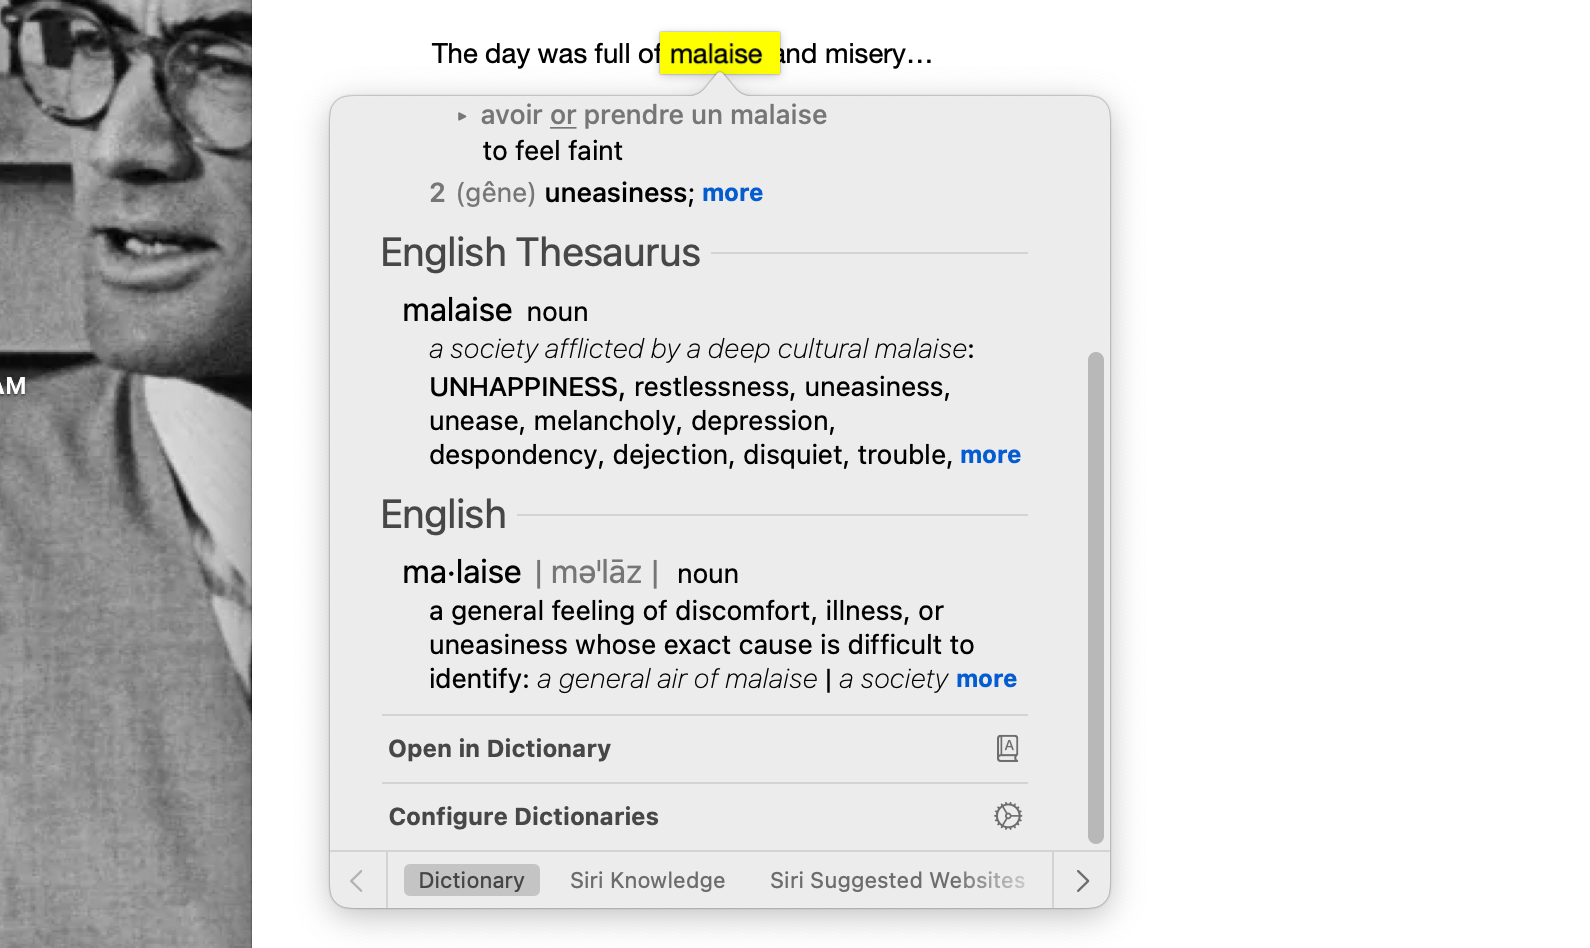 Look Up feature used to bring up Dictionary definitions of a word on a Mac